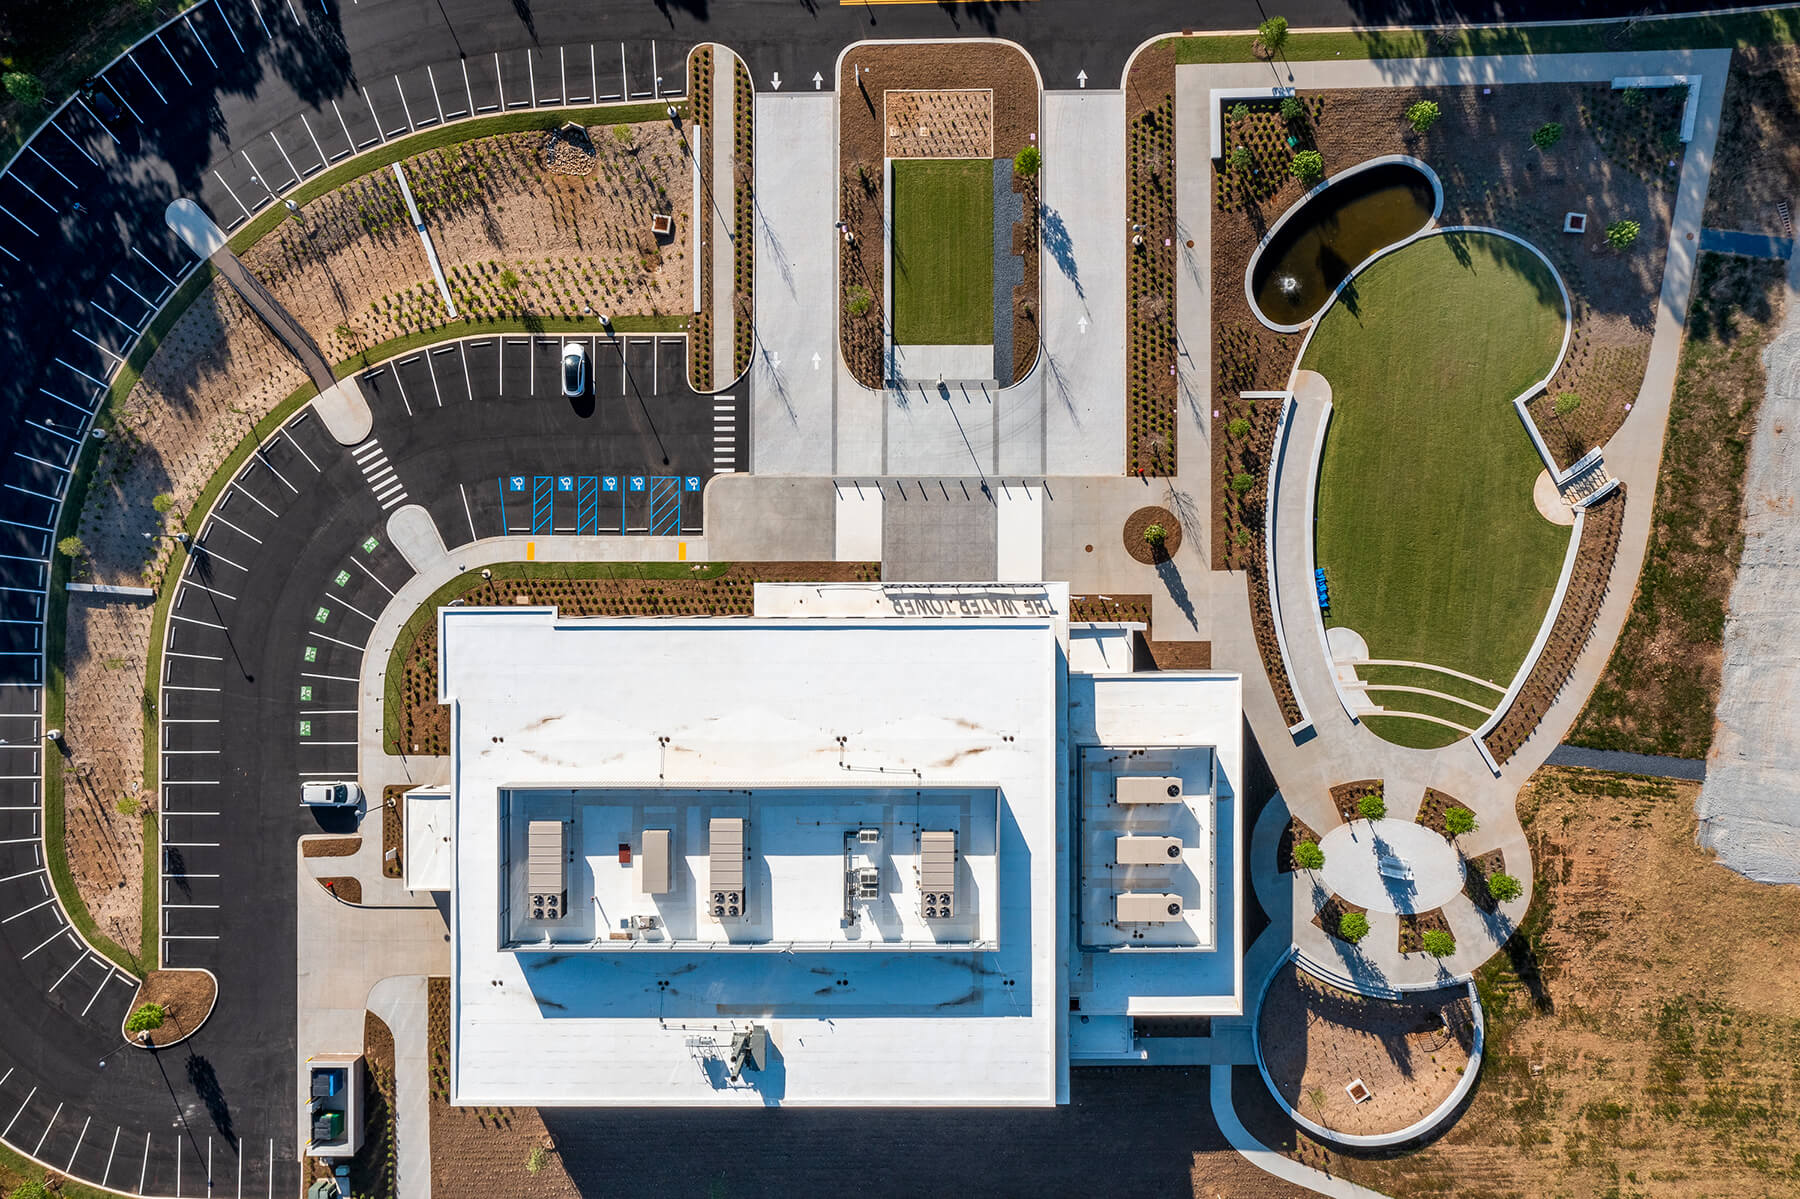 Aerial view of The Water Tower Global Innovation Hub campus